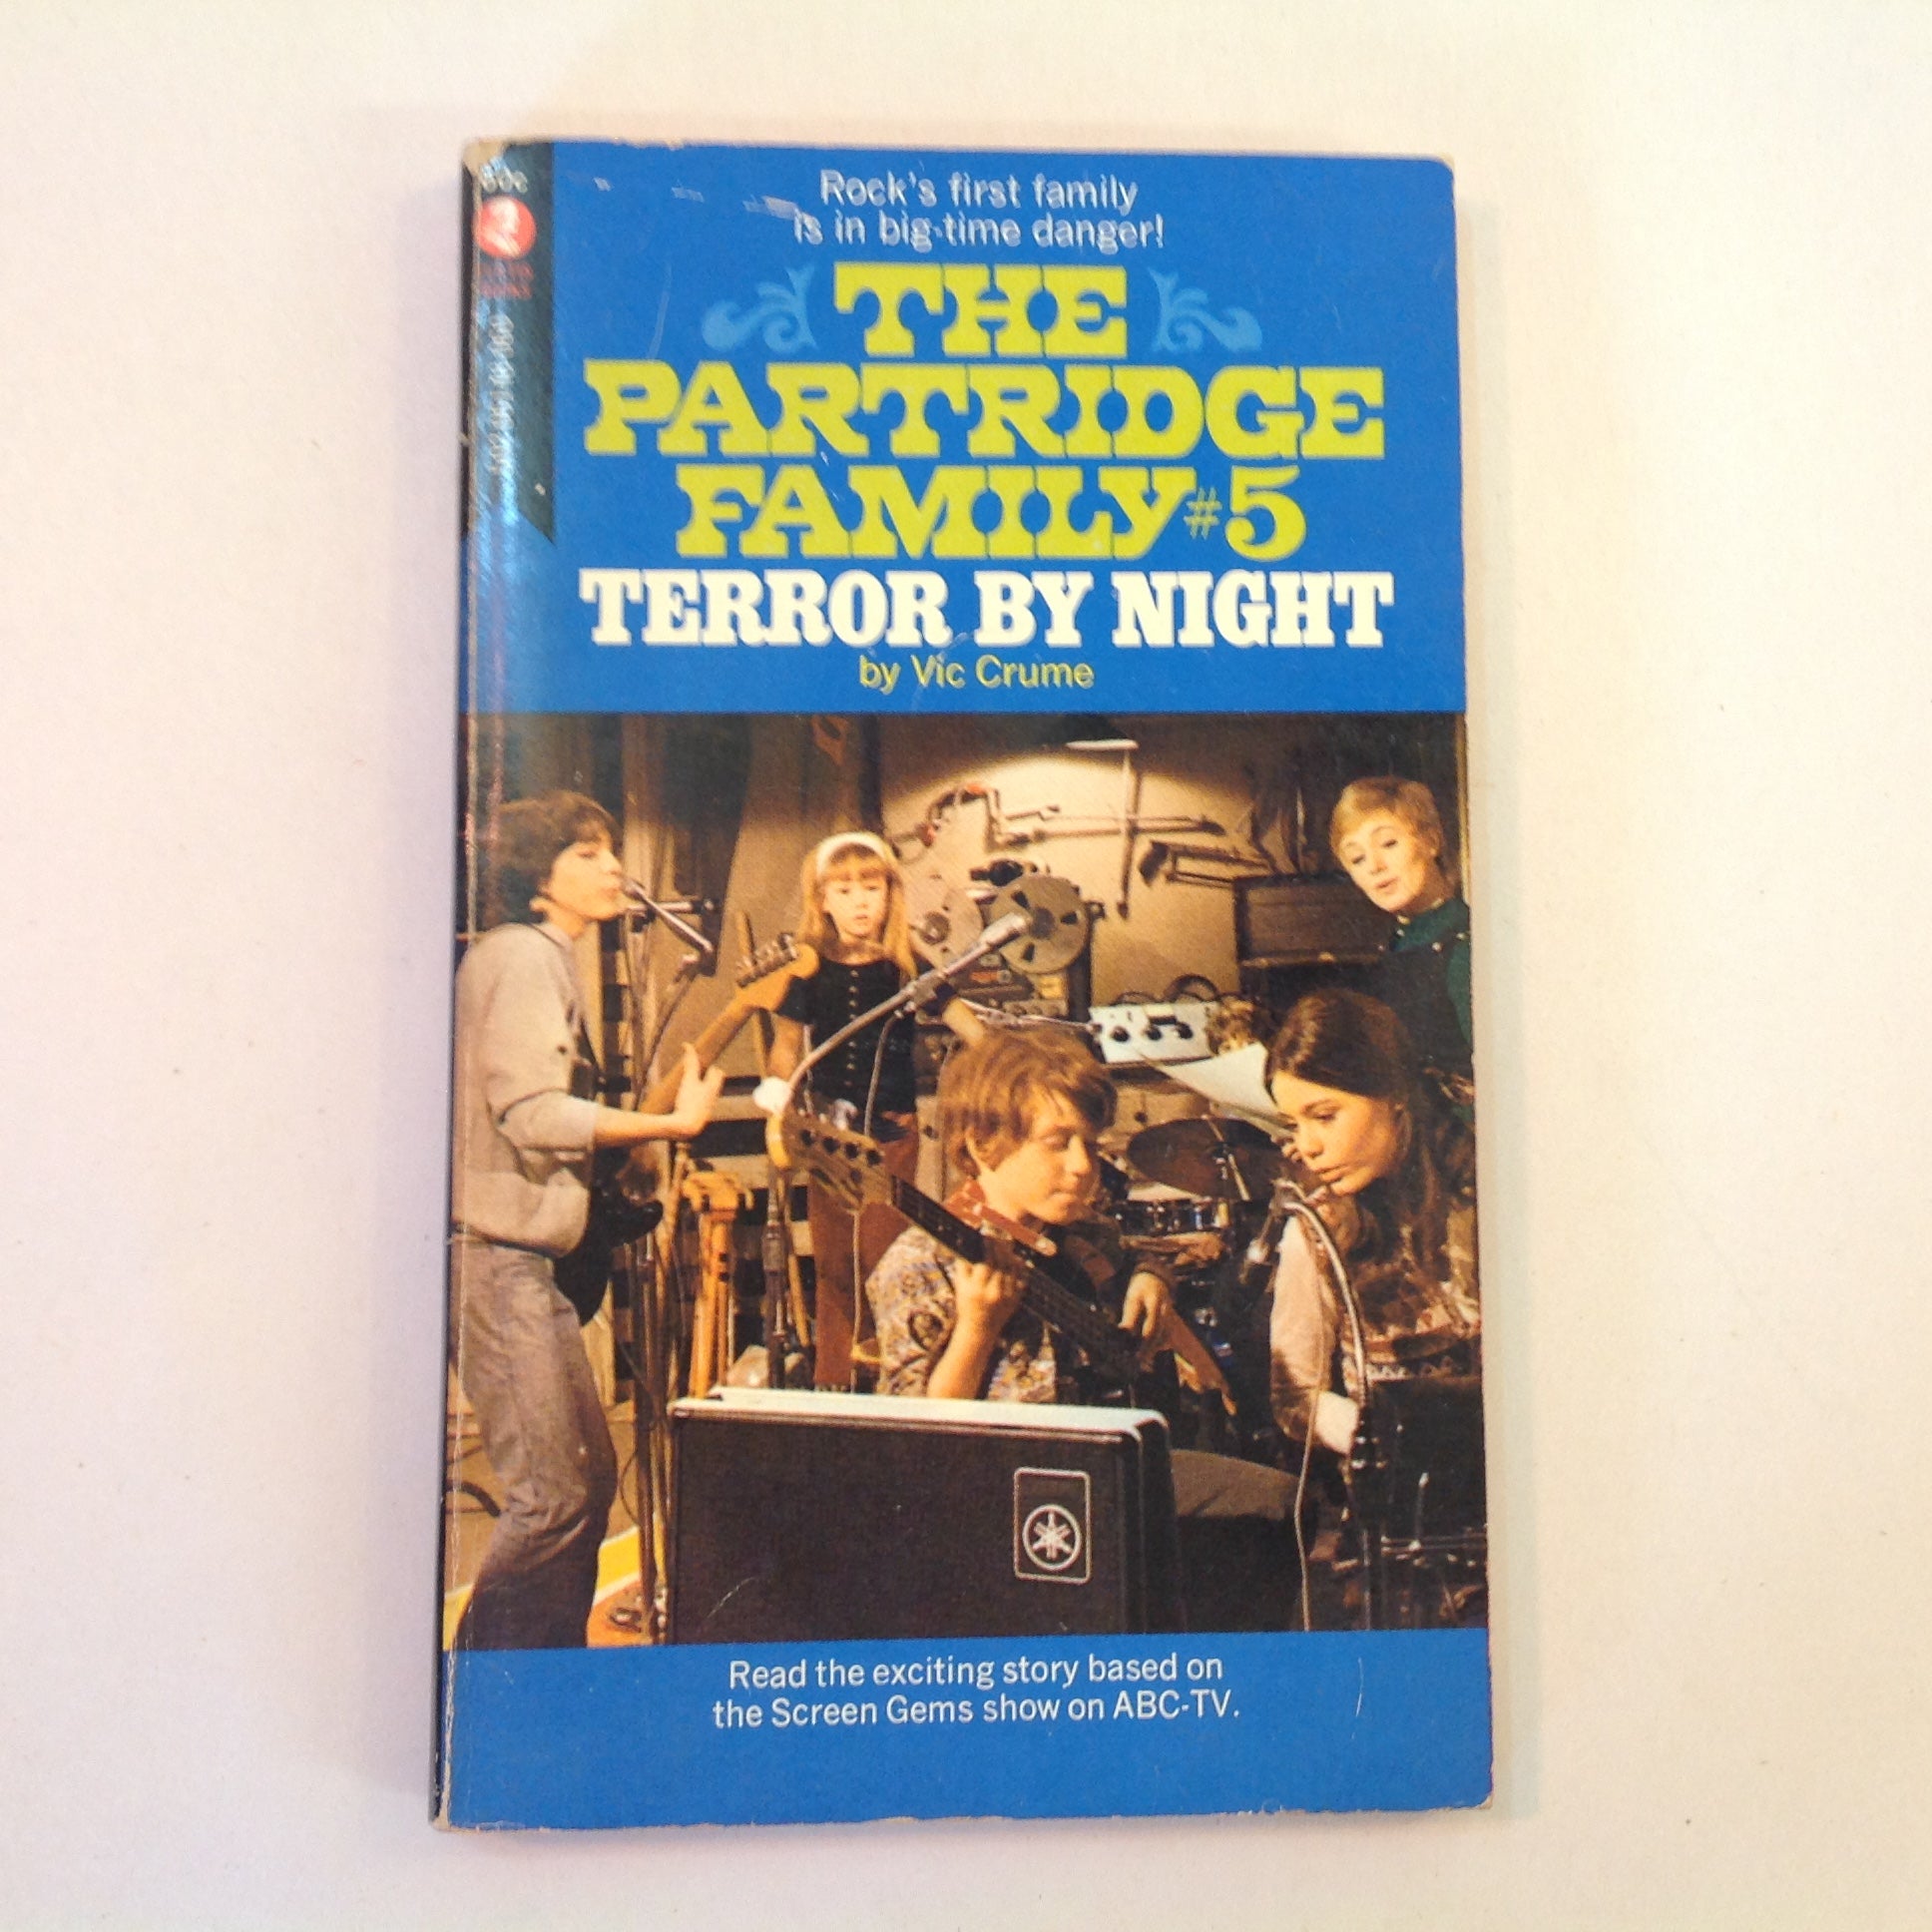 Vintage 1971 Mass Market Paperback The Partridge Family #5: Terror By Night Vic Crume Columbia Pictures